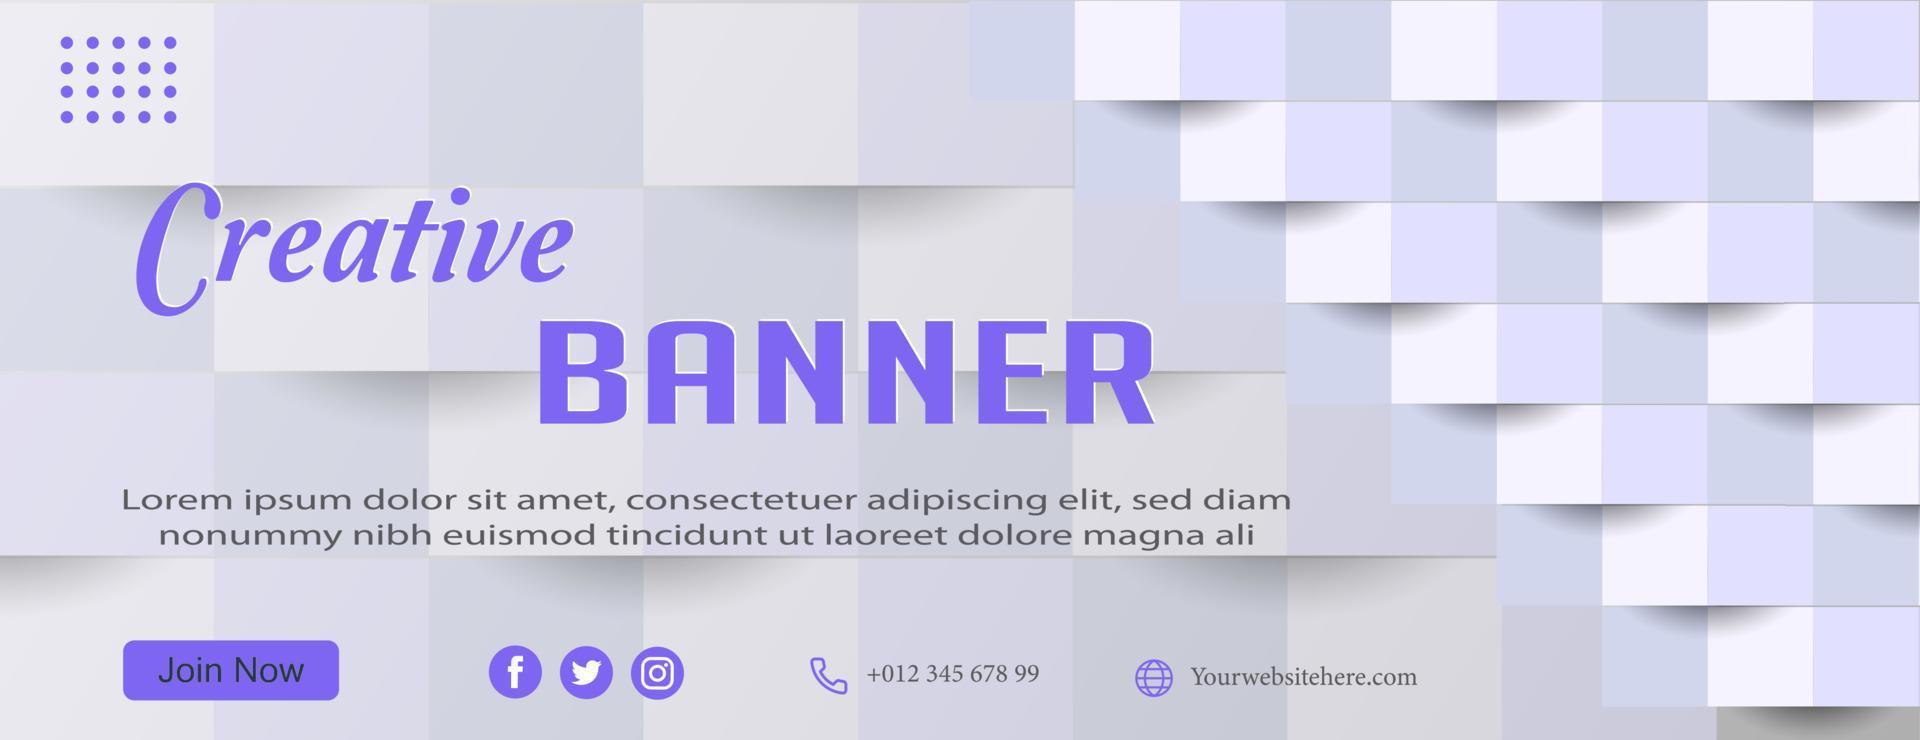 creative banner background vector design 3d paper art stylish abstract texture